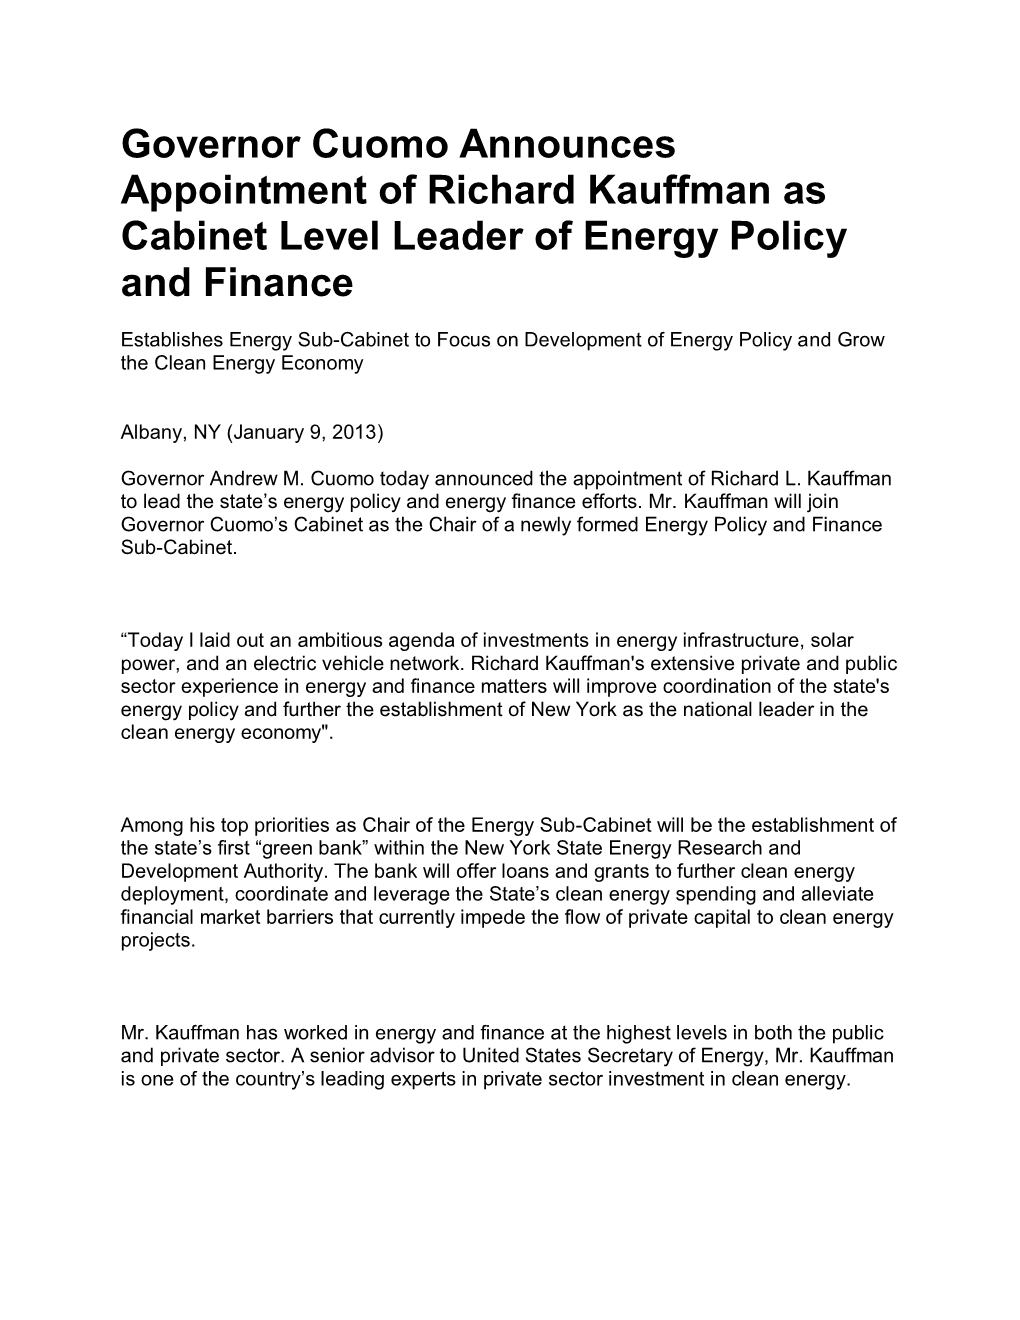 Governor Cuomo Announces Appointment of Richard Kauffman As Cabinet Level Leader of Energy Policy and Finance